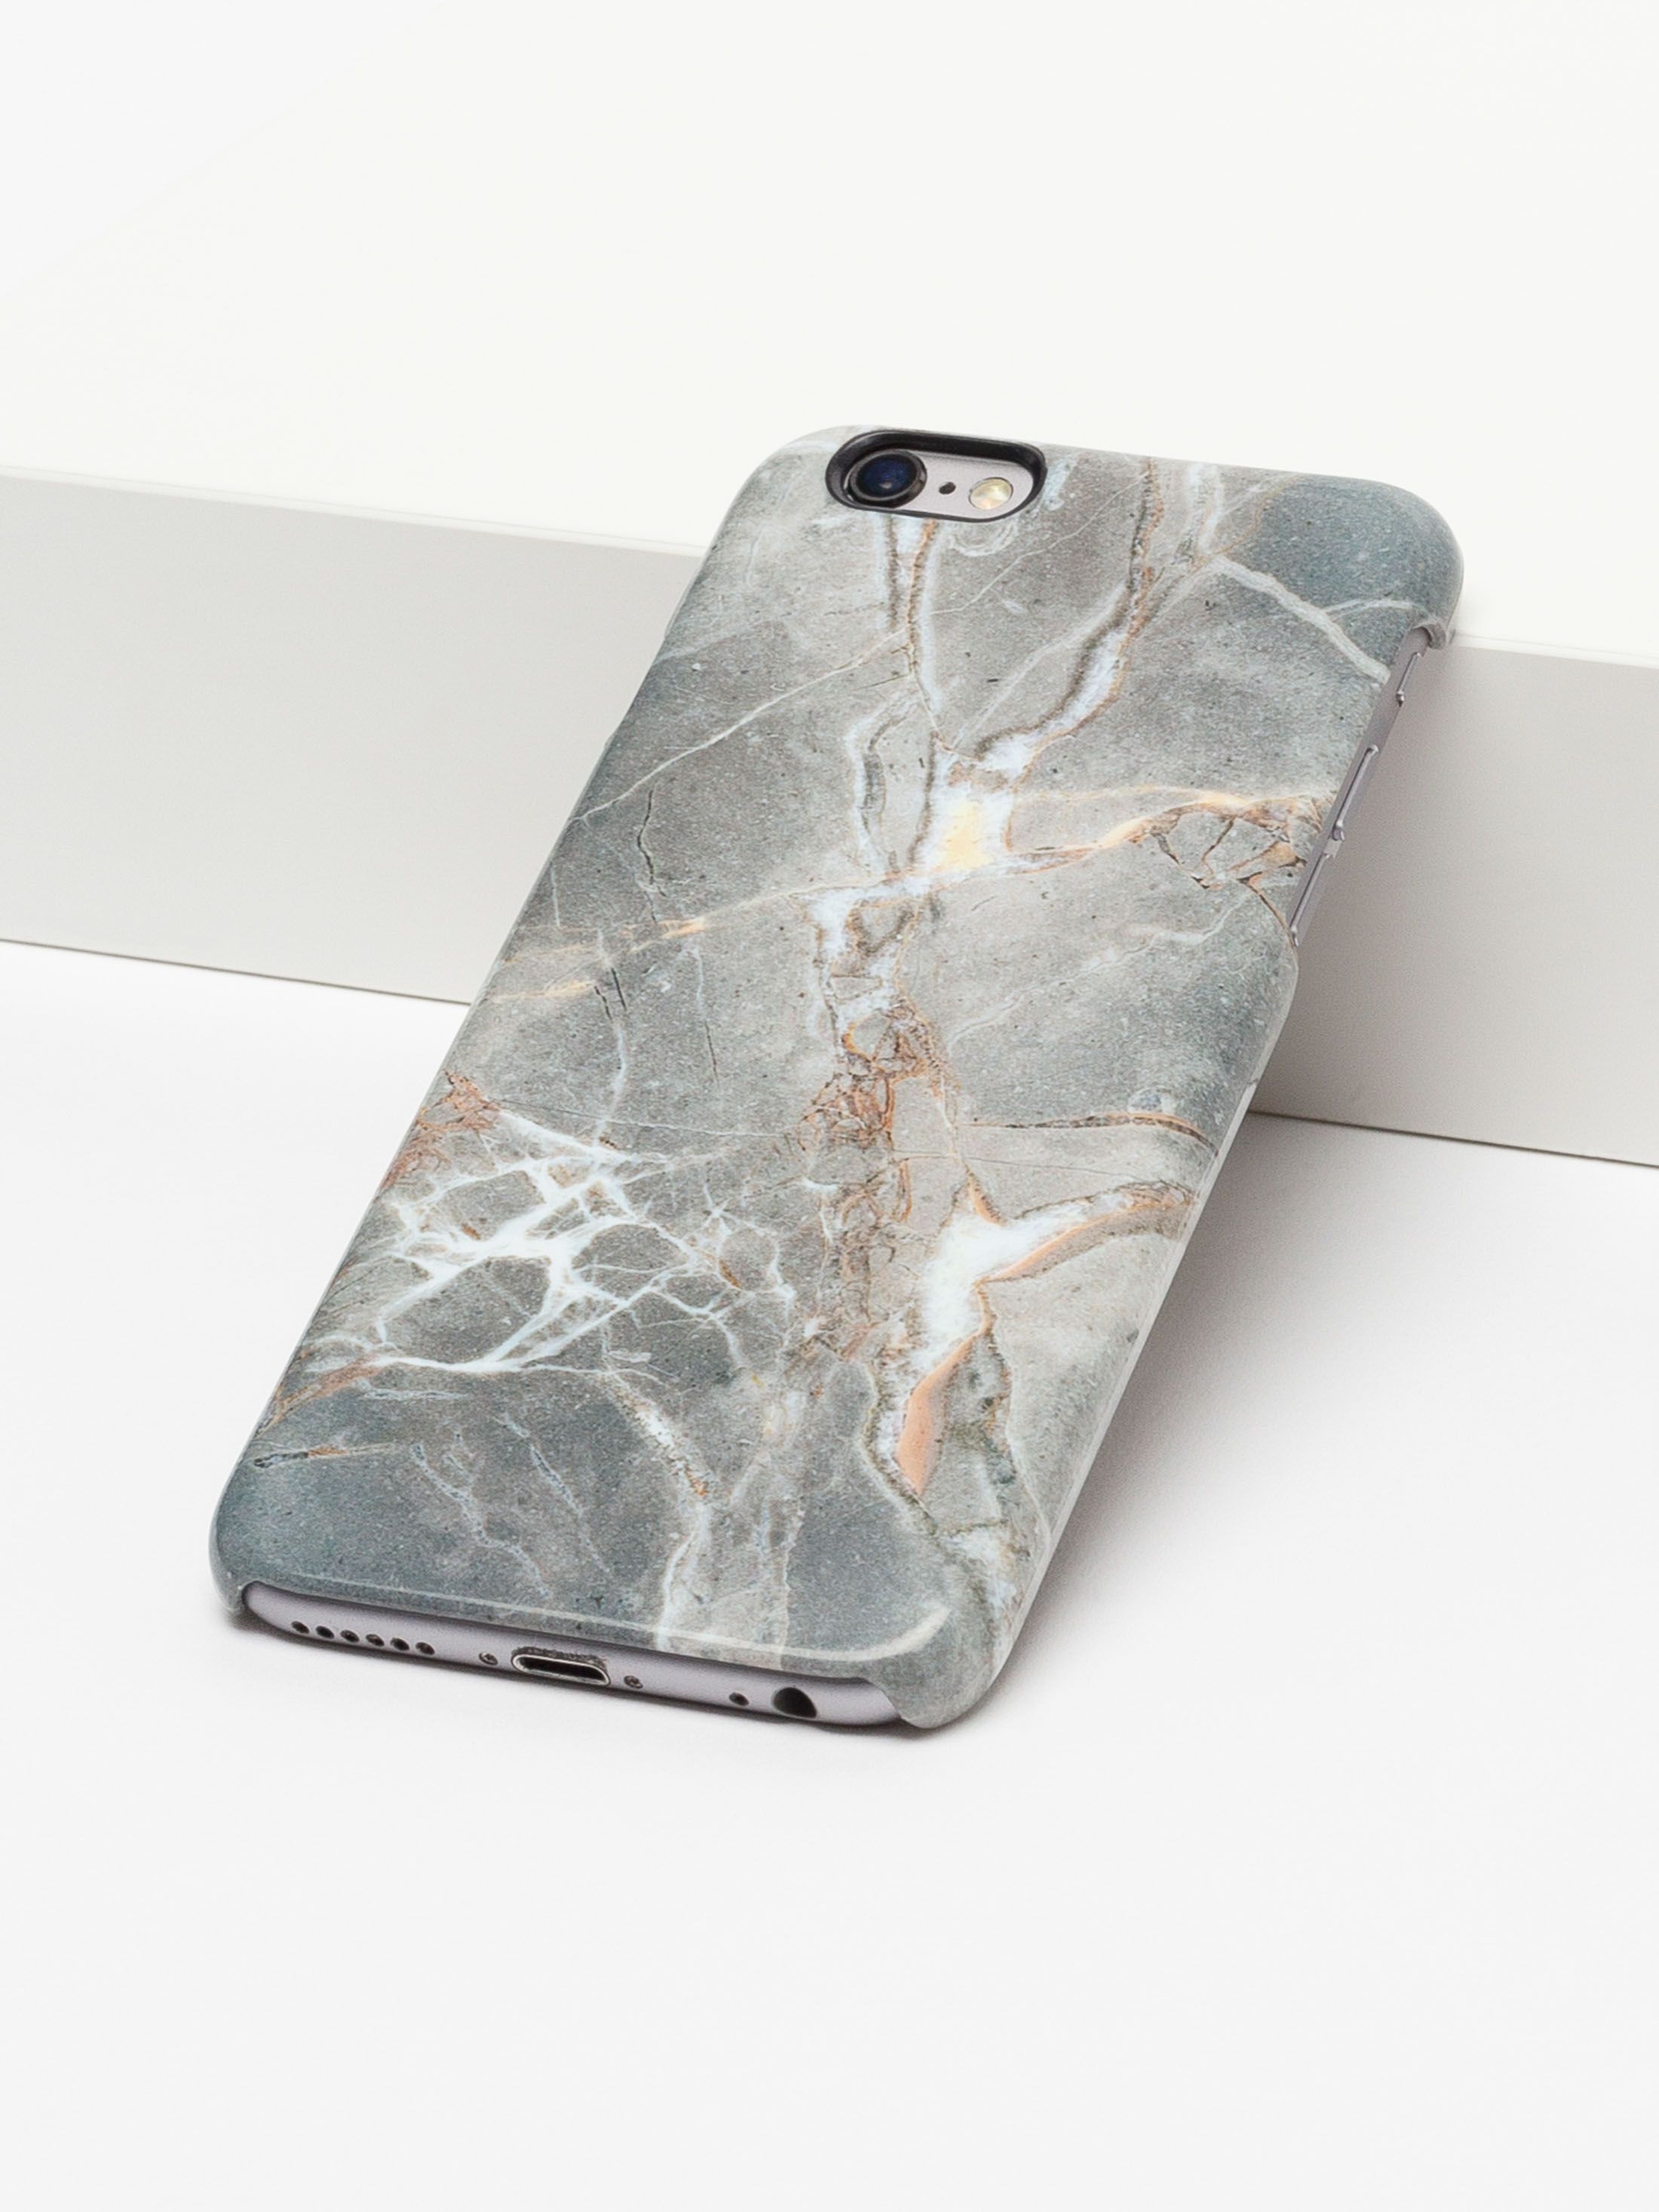 design your own iphone 6 case